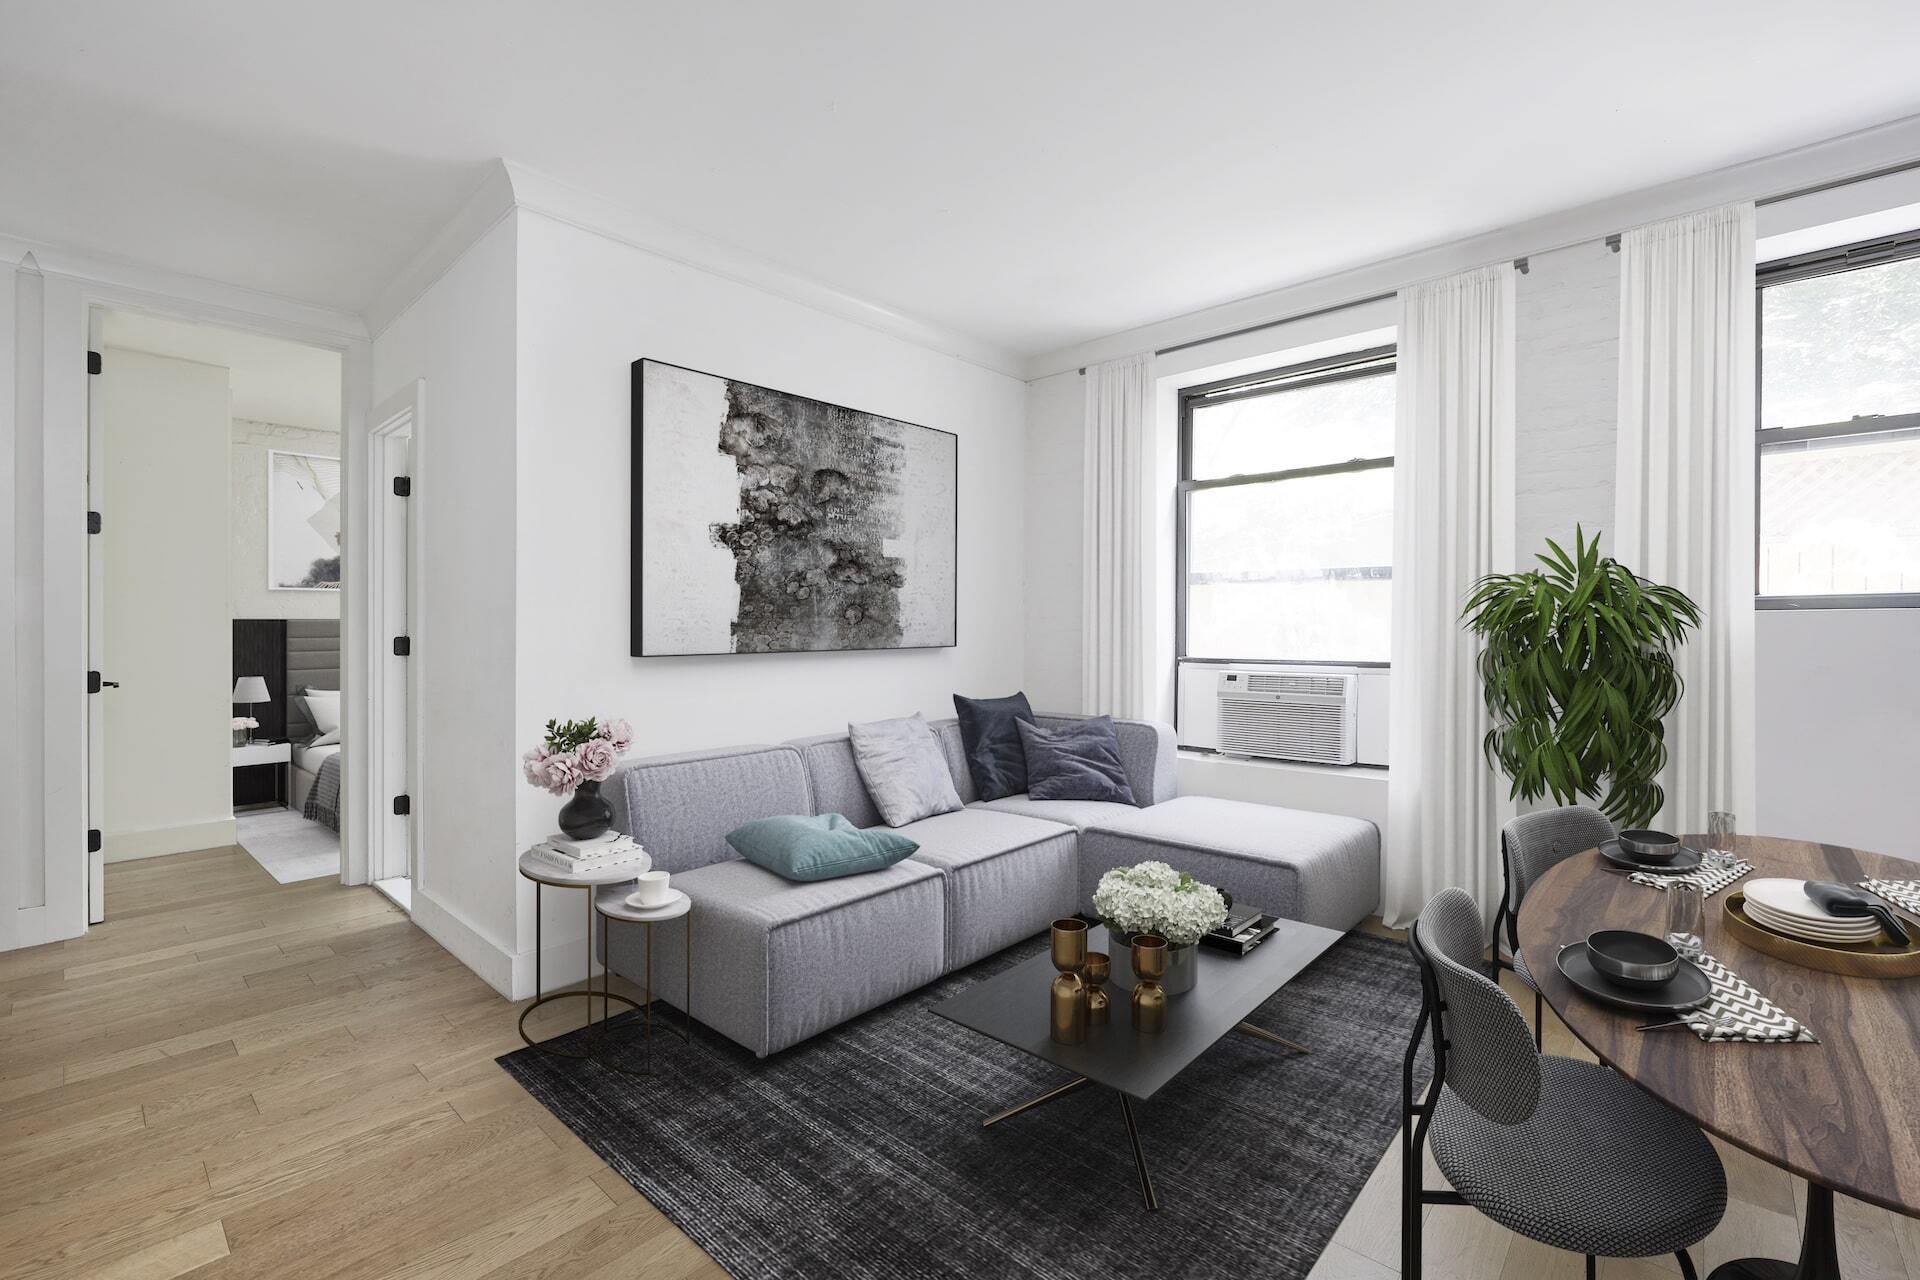 112 Ave C 2, Alphabet City, Downtown, NYC - 4 Bedrooms  
2 Bathrooms  
7 Rooms - 